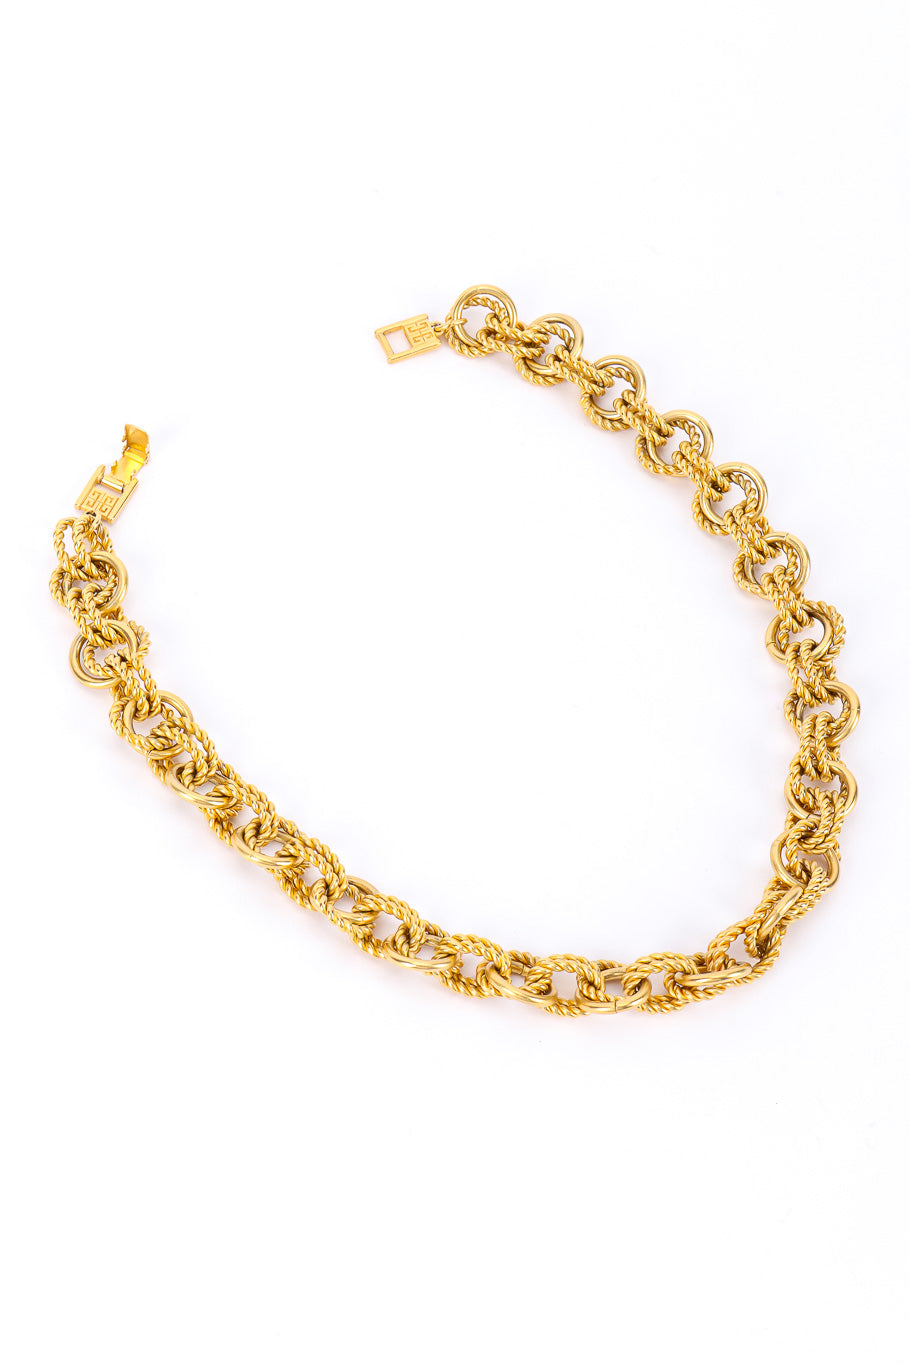 Vintage Givenchy Double Rope Chainlink Necklace unclasped @Recessla